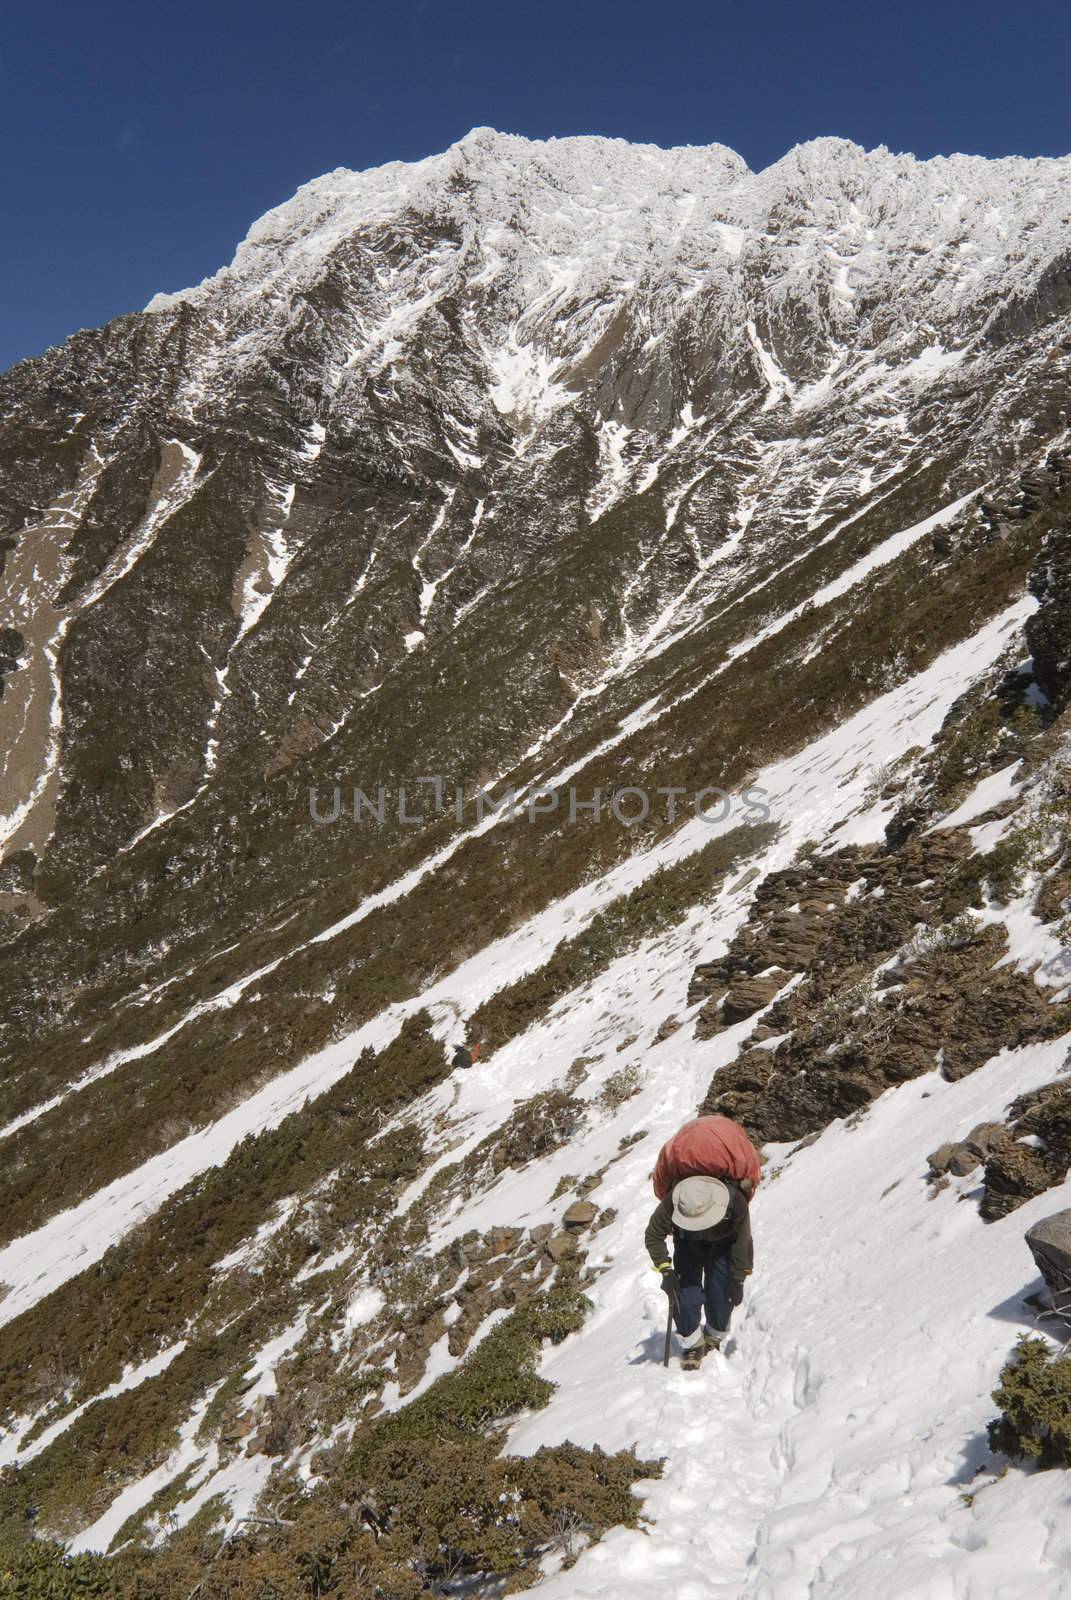 A man walk on snow, background was the highest mountain of eastsouth Asia.